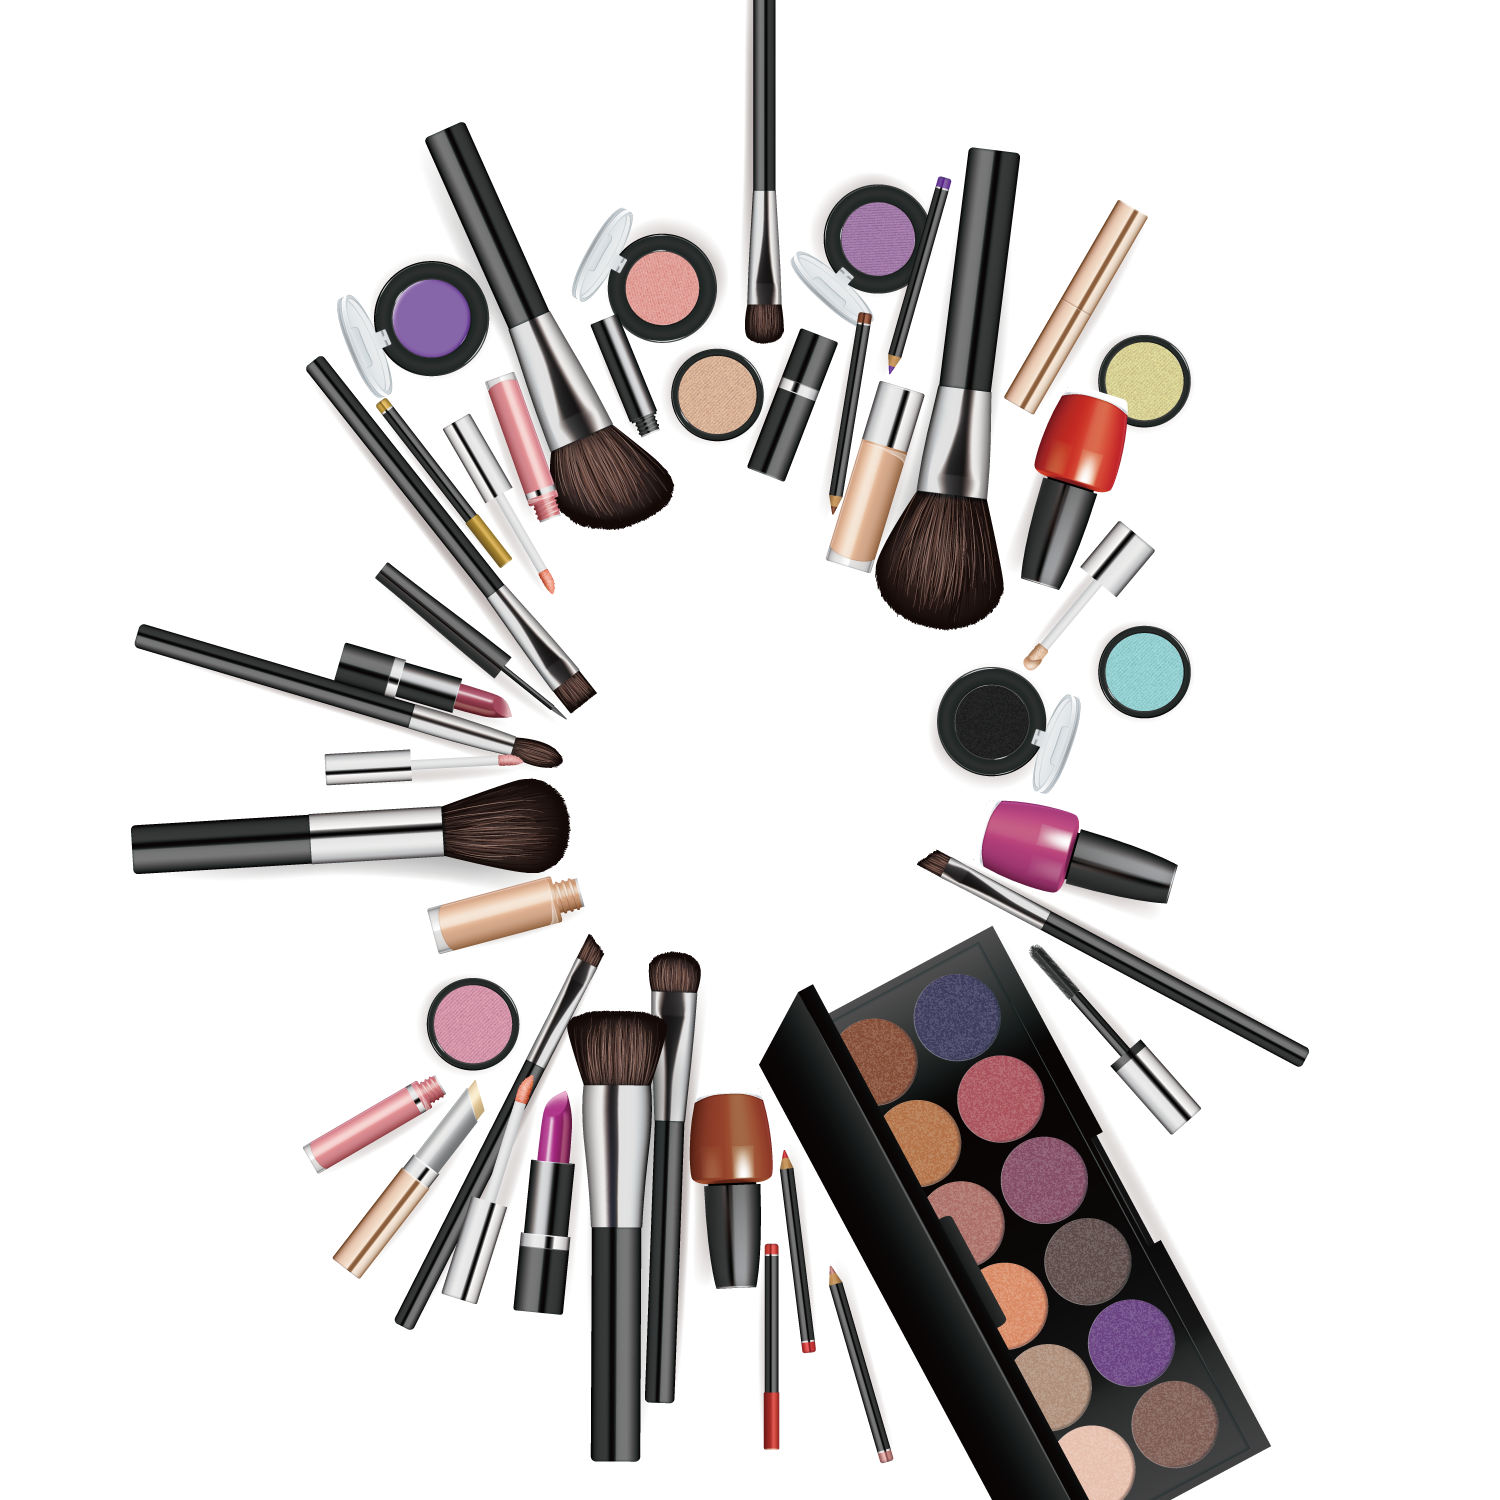 Brushes Cosmetics Free HQ Image PNG Image